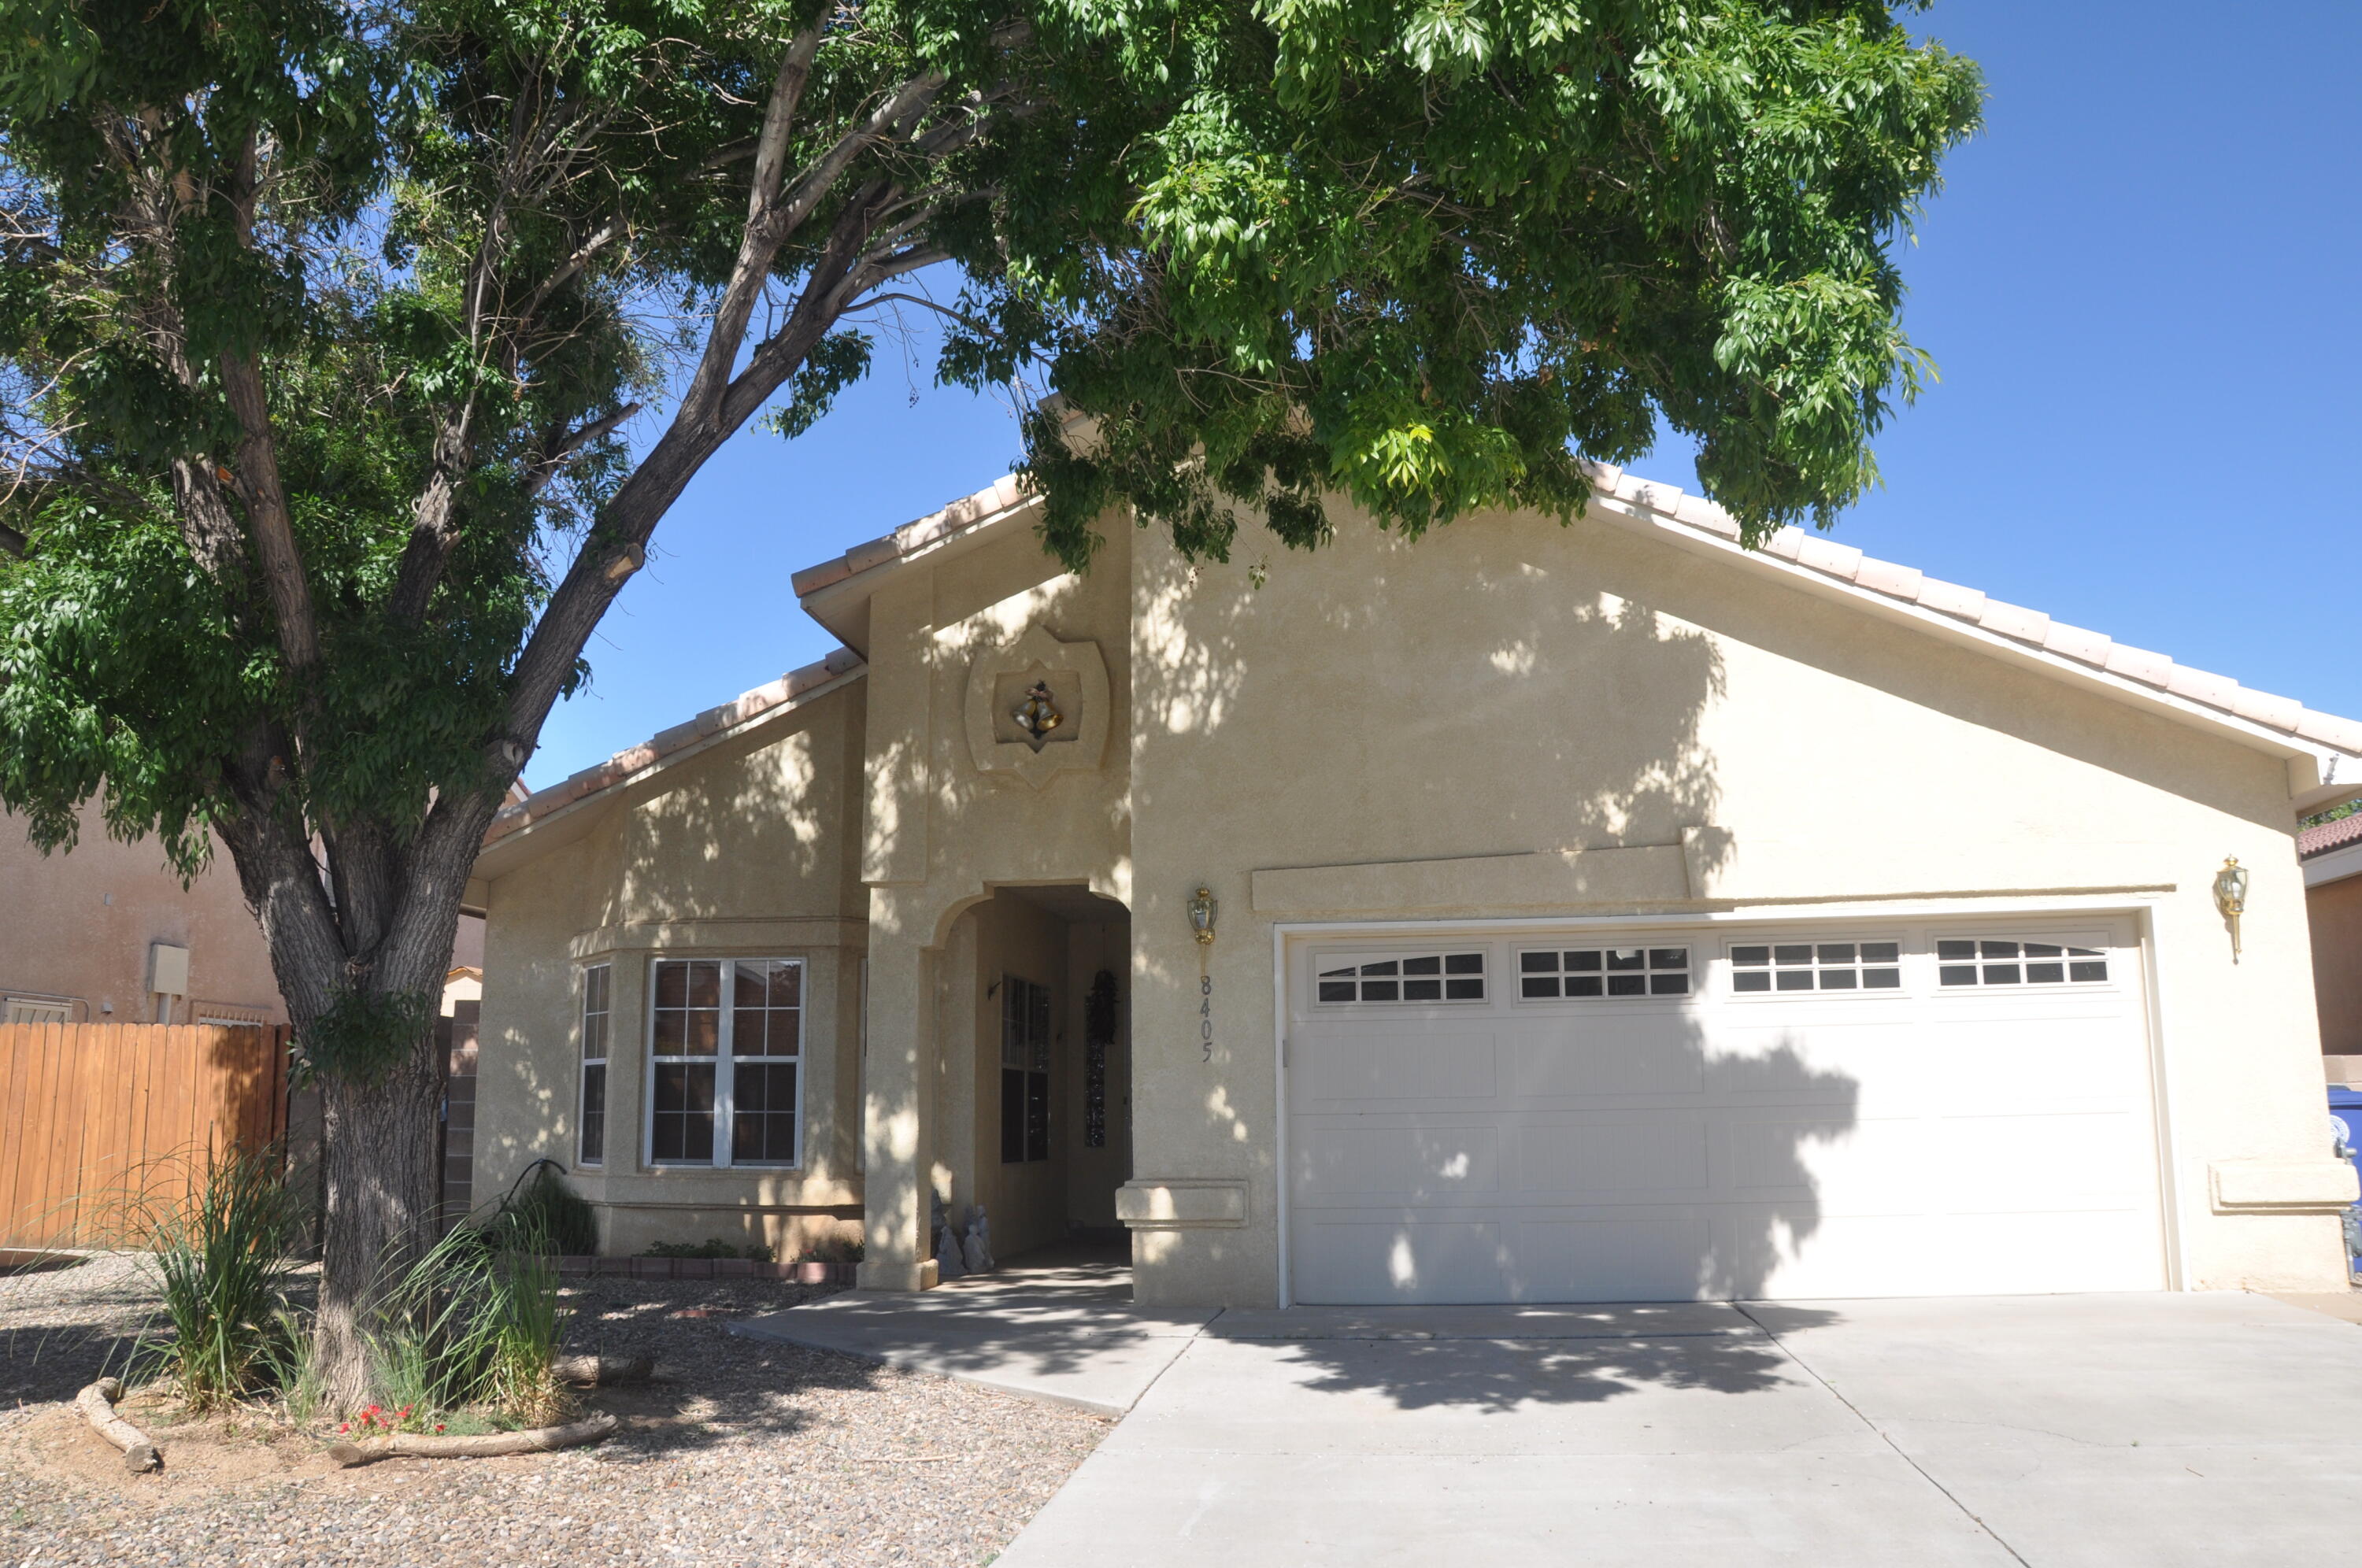 PRICE DROPPED AGAIN!Great home located in the desired La Cueva district. Pride of ownership shows in this beautiful home. Ceiling fans and skylights. Beautiful Kiva style fireplace. Don't wait!